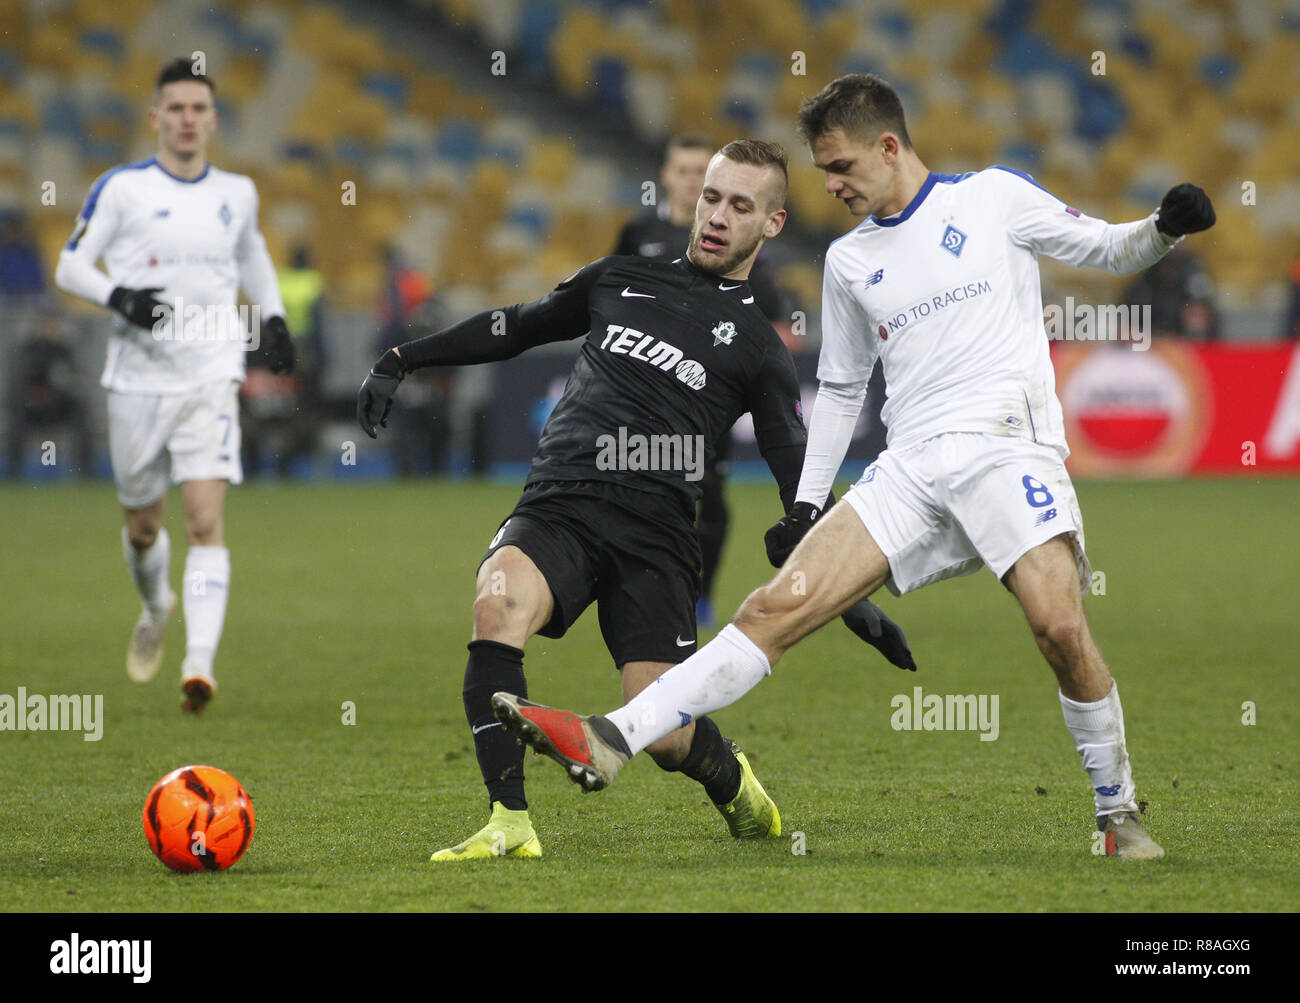 Kiev, Ukraine. 13th Dec, 2018. Milos KratochvÃ-l (L) of Jablonec and Volodymyr Shepeliev (R) of Dynamo are seen in action during the UEFA Europa League Group K soccer match between FC Dynamo Kiev and FK Jablonec at the NSK Olimpiyskiy in Kiev. Credit: Vadim Kot/SOPA Images/ZUMA Wire/Alamy Live News Stock Photo